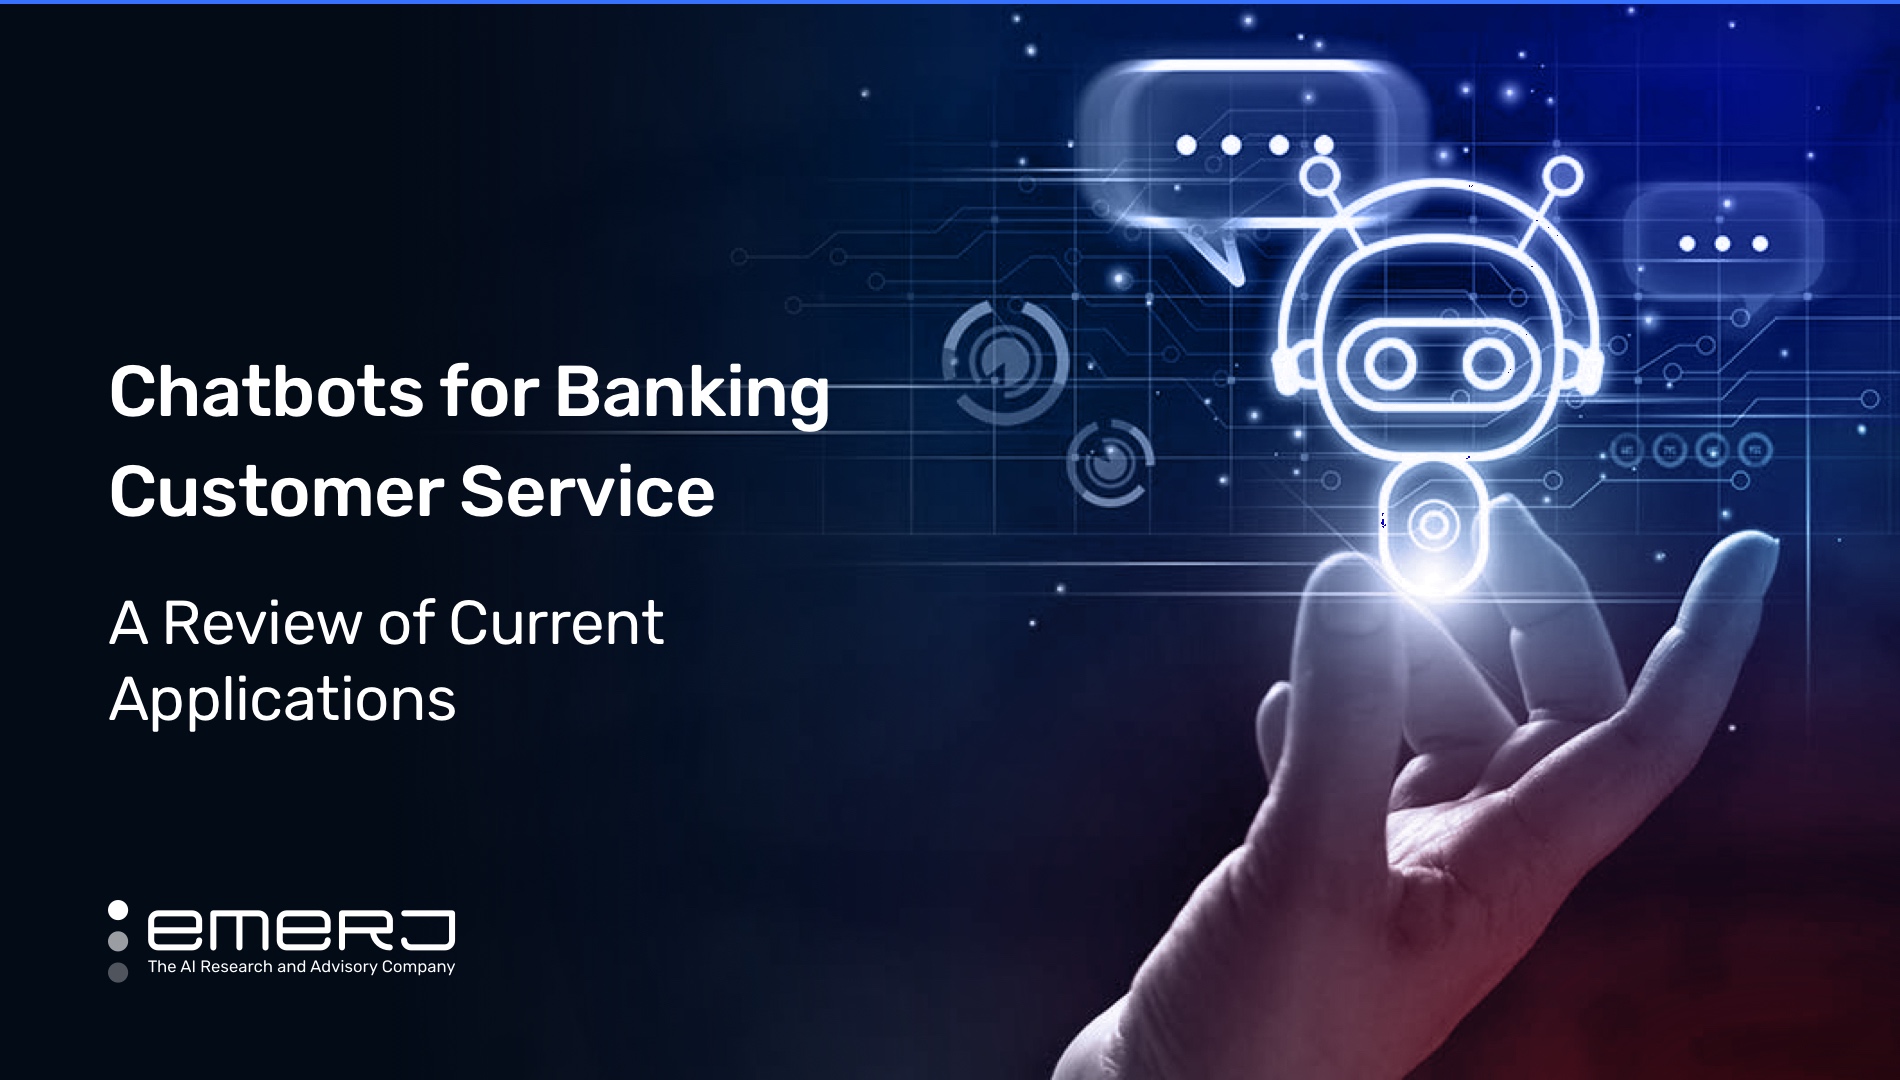 Chatbots for Banking Customer Service/Customer Experience – A Review of Current Applications